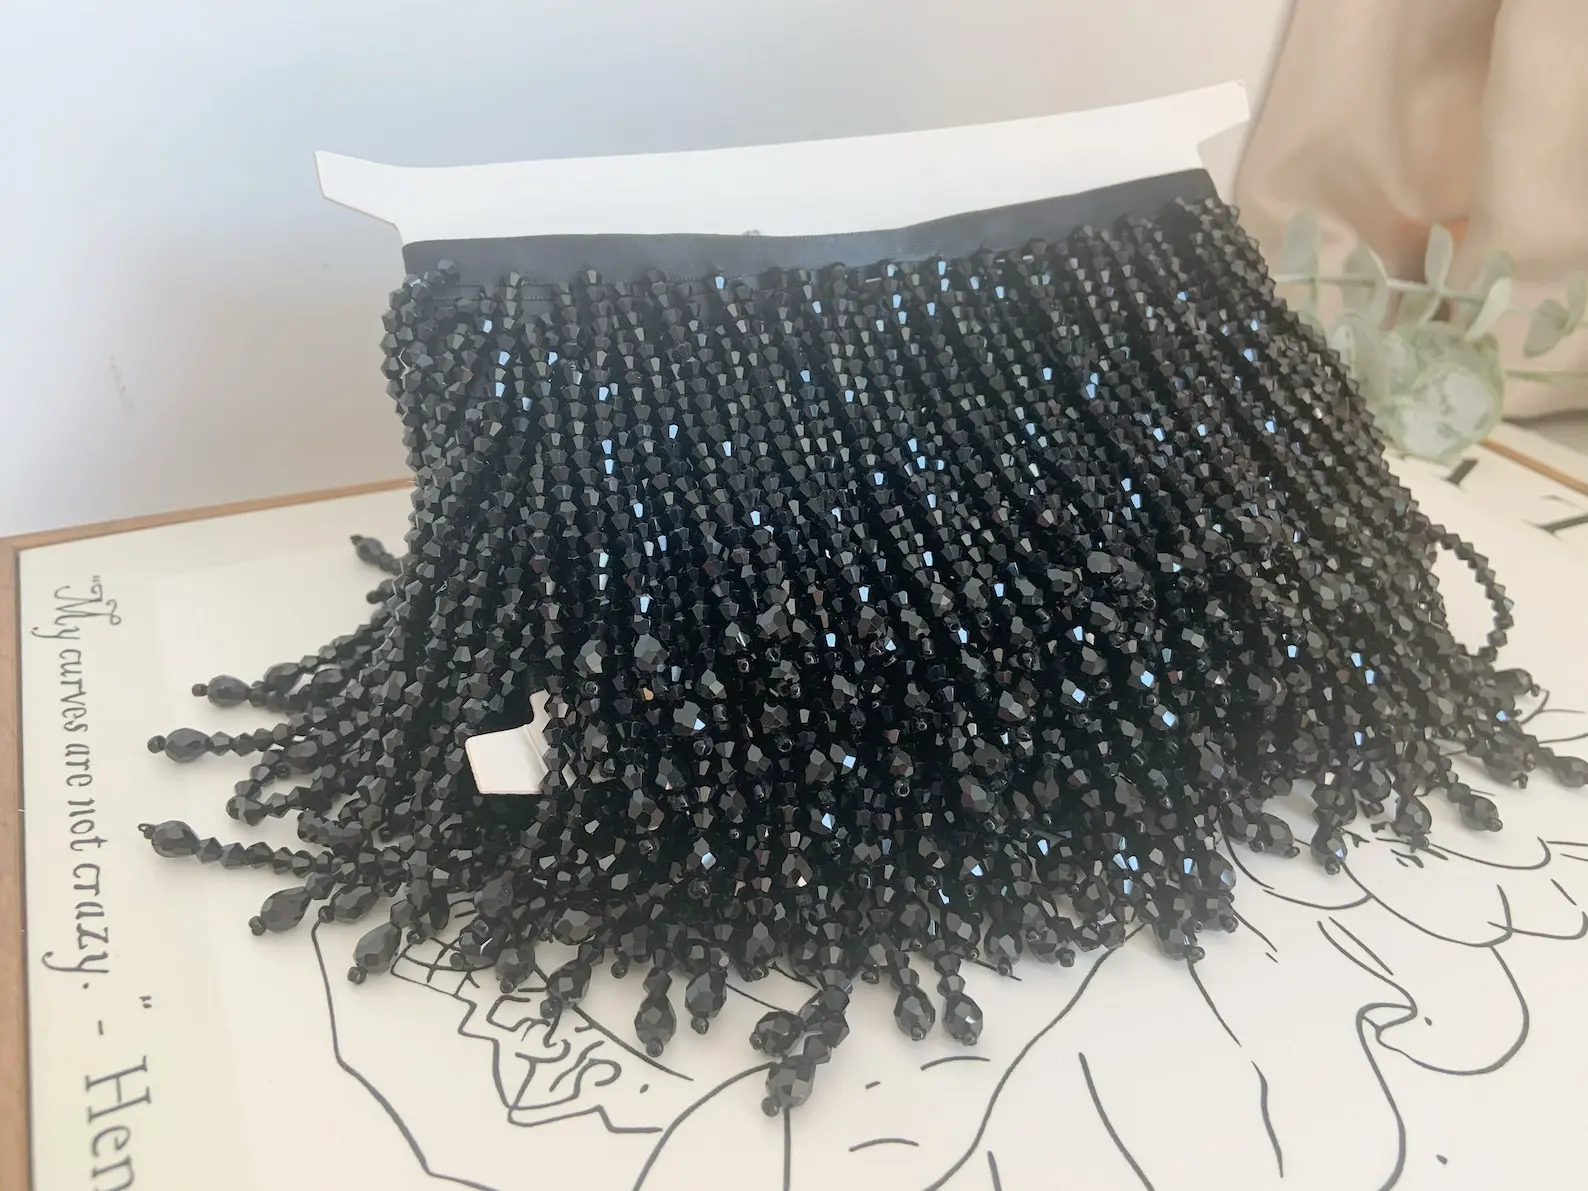 

5 Yards Black Crystal Fringe Trim for Haute Couture Dance Costume Party Decorations Dress Embellishments Halloween Costume